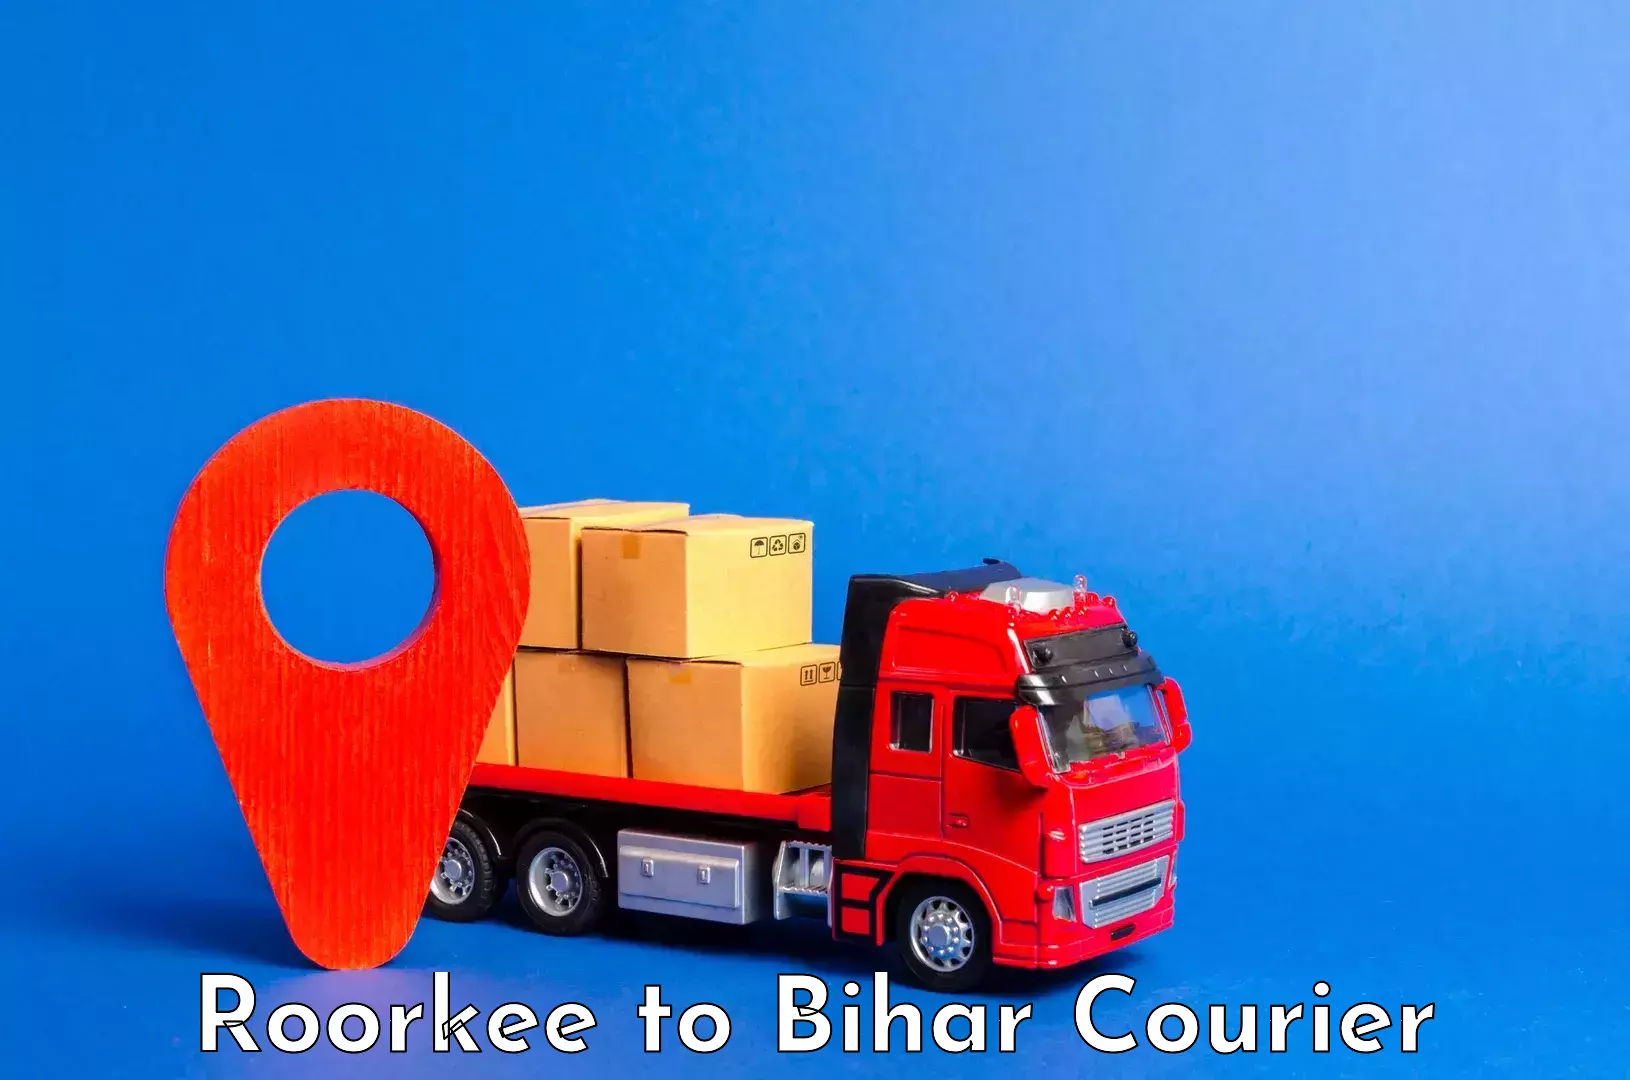 Baggage transport quote Roorkee to Dhaka